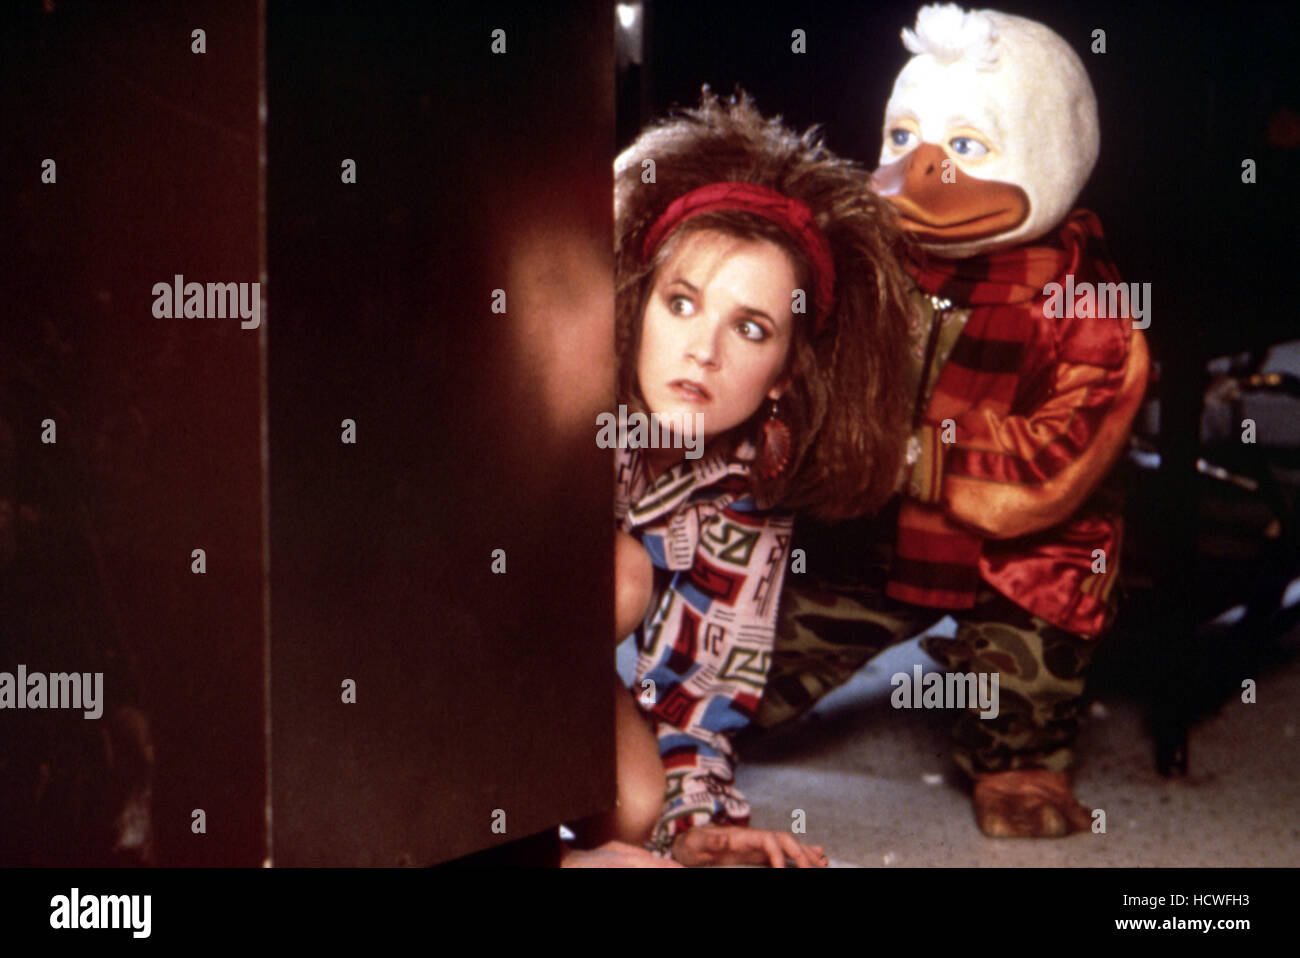 HOWARD THE DUCK, Lea Thompson, 1986. (c) Universal Pictures/ Courtesy: Everett Collection. Stock Photo